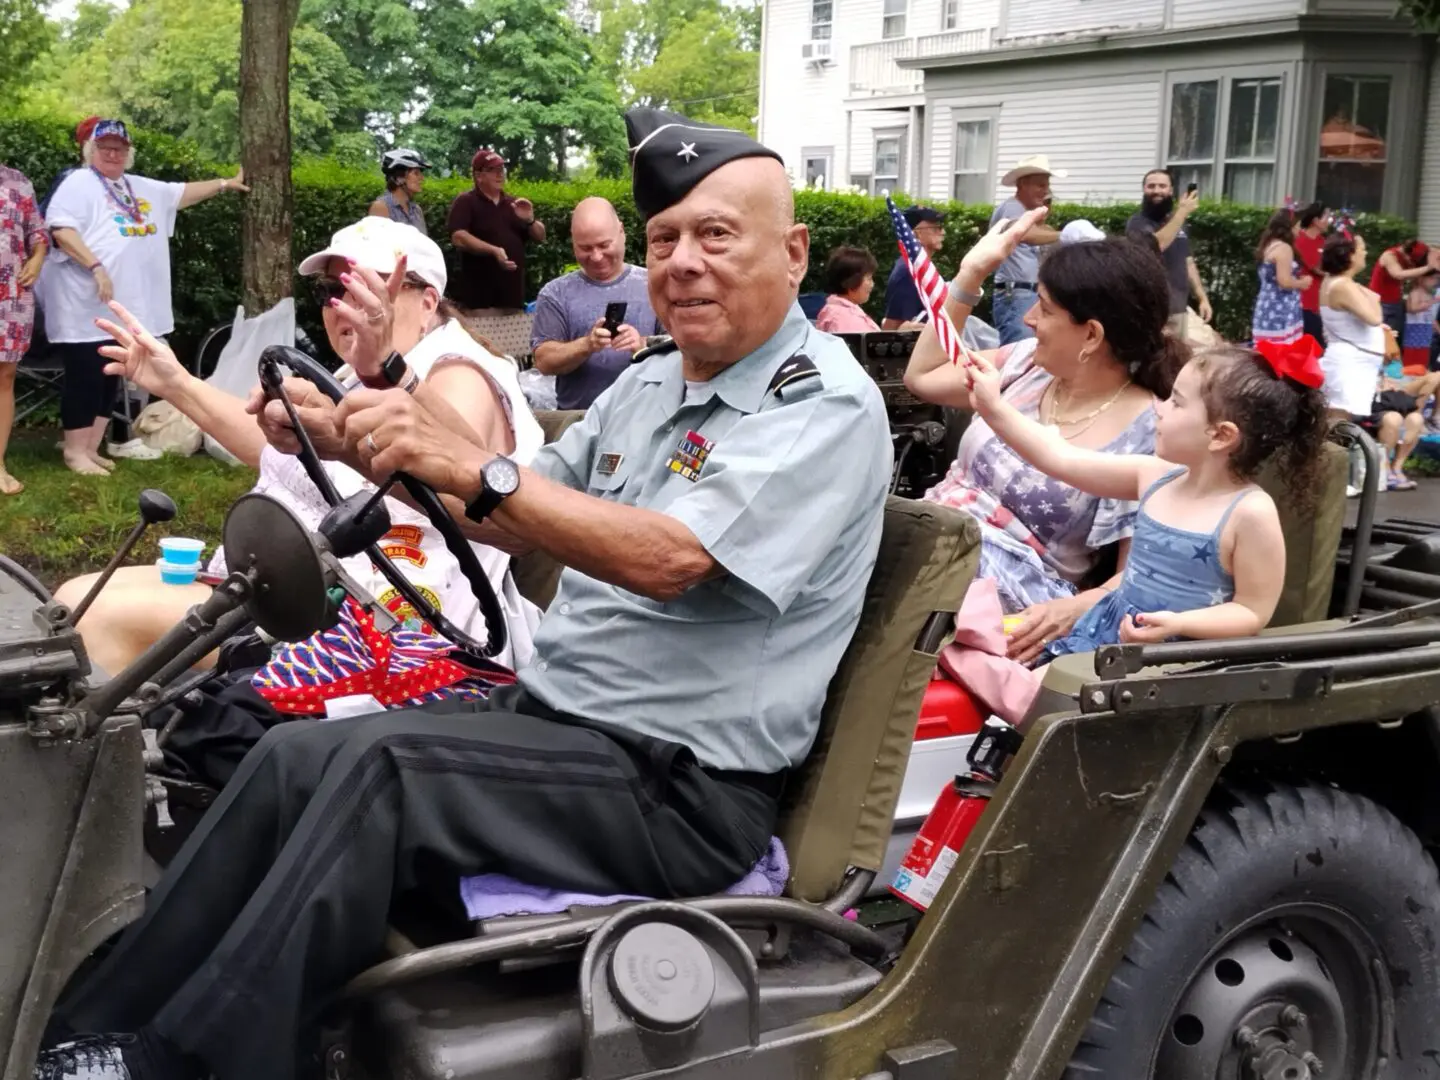 A veteran driving a jeep in a parade.